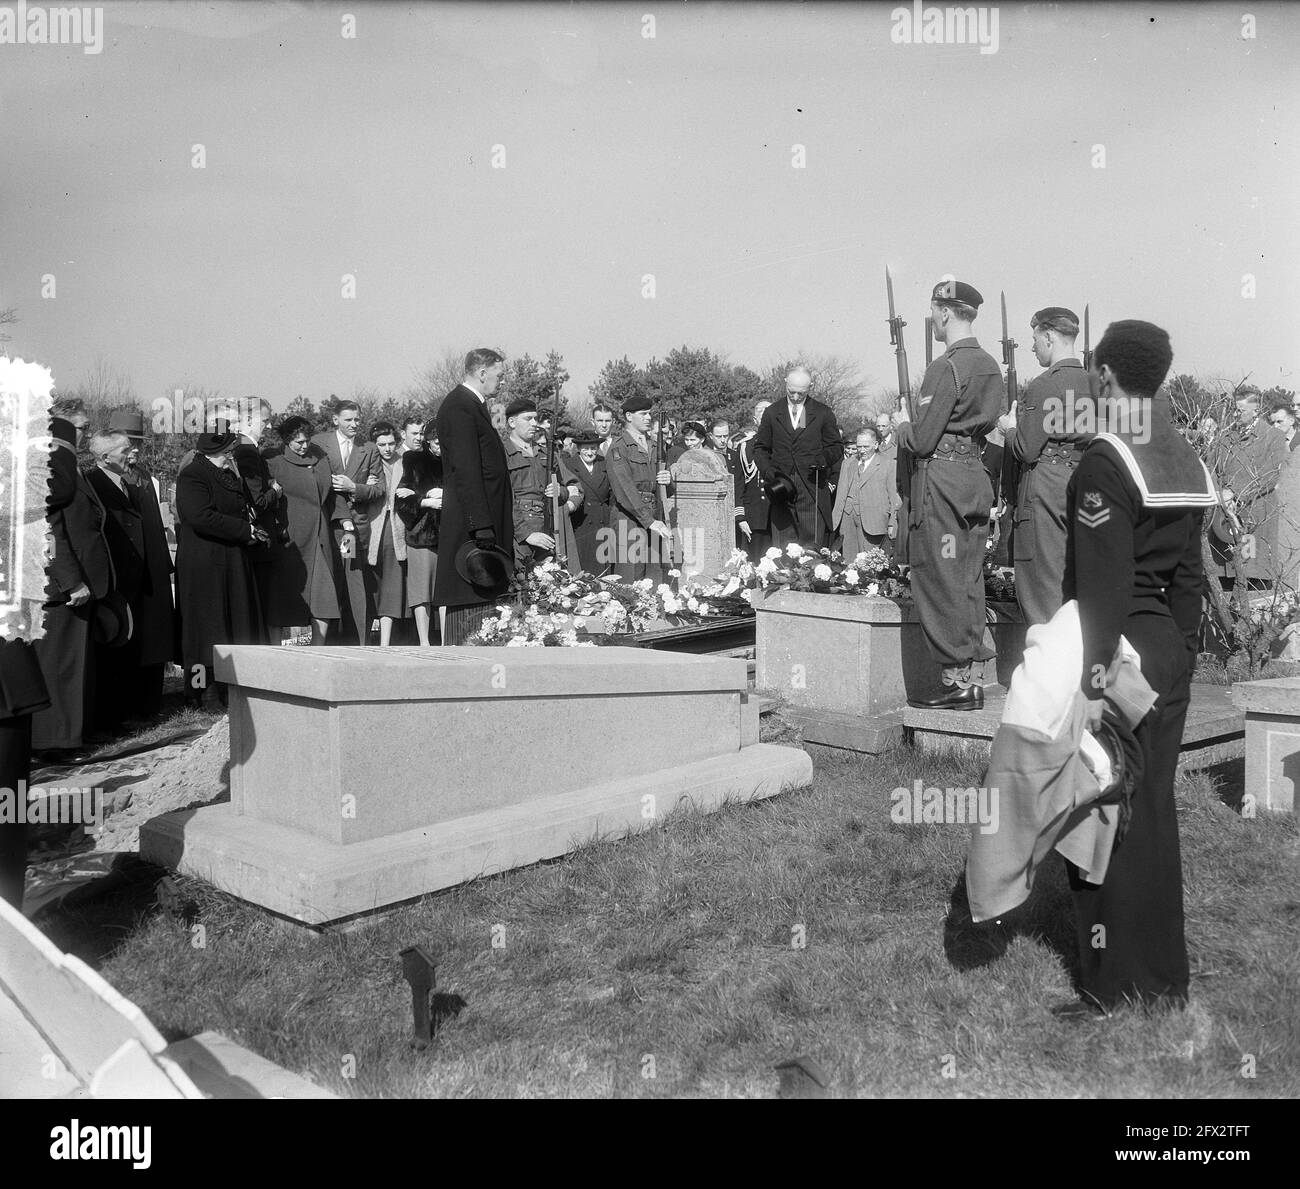 Marvo funeral Den Helder military workman Beishuizen, April 29, 1955, Funerals, The Netherlands, 20th century press agency photo, news to remember, documentary, historic photography 1945-1990, visual stories, human history of the Twentieth Century, capturing moments in time Stock Photo